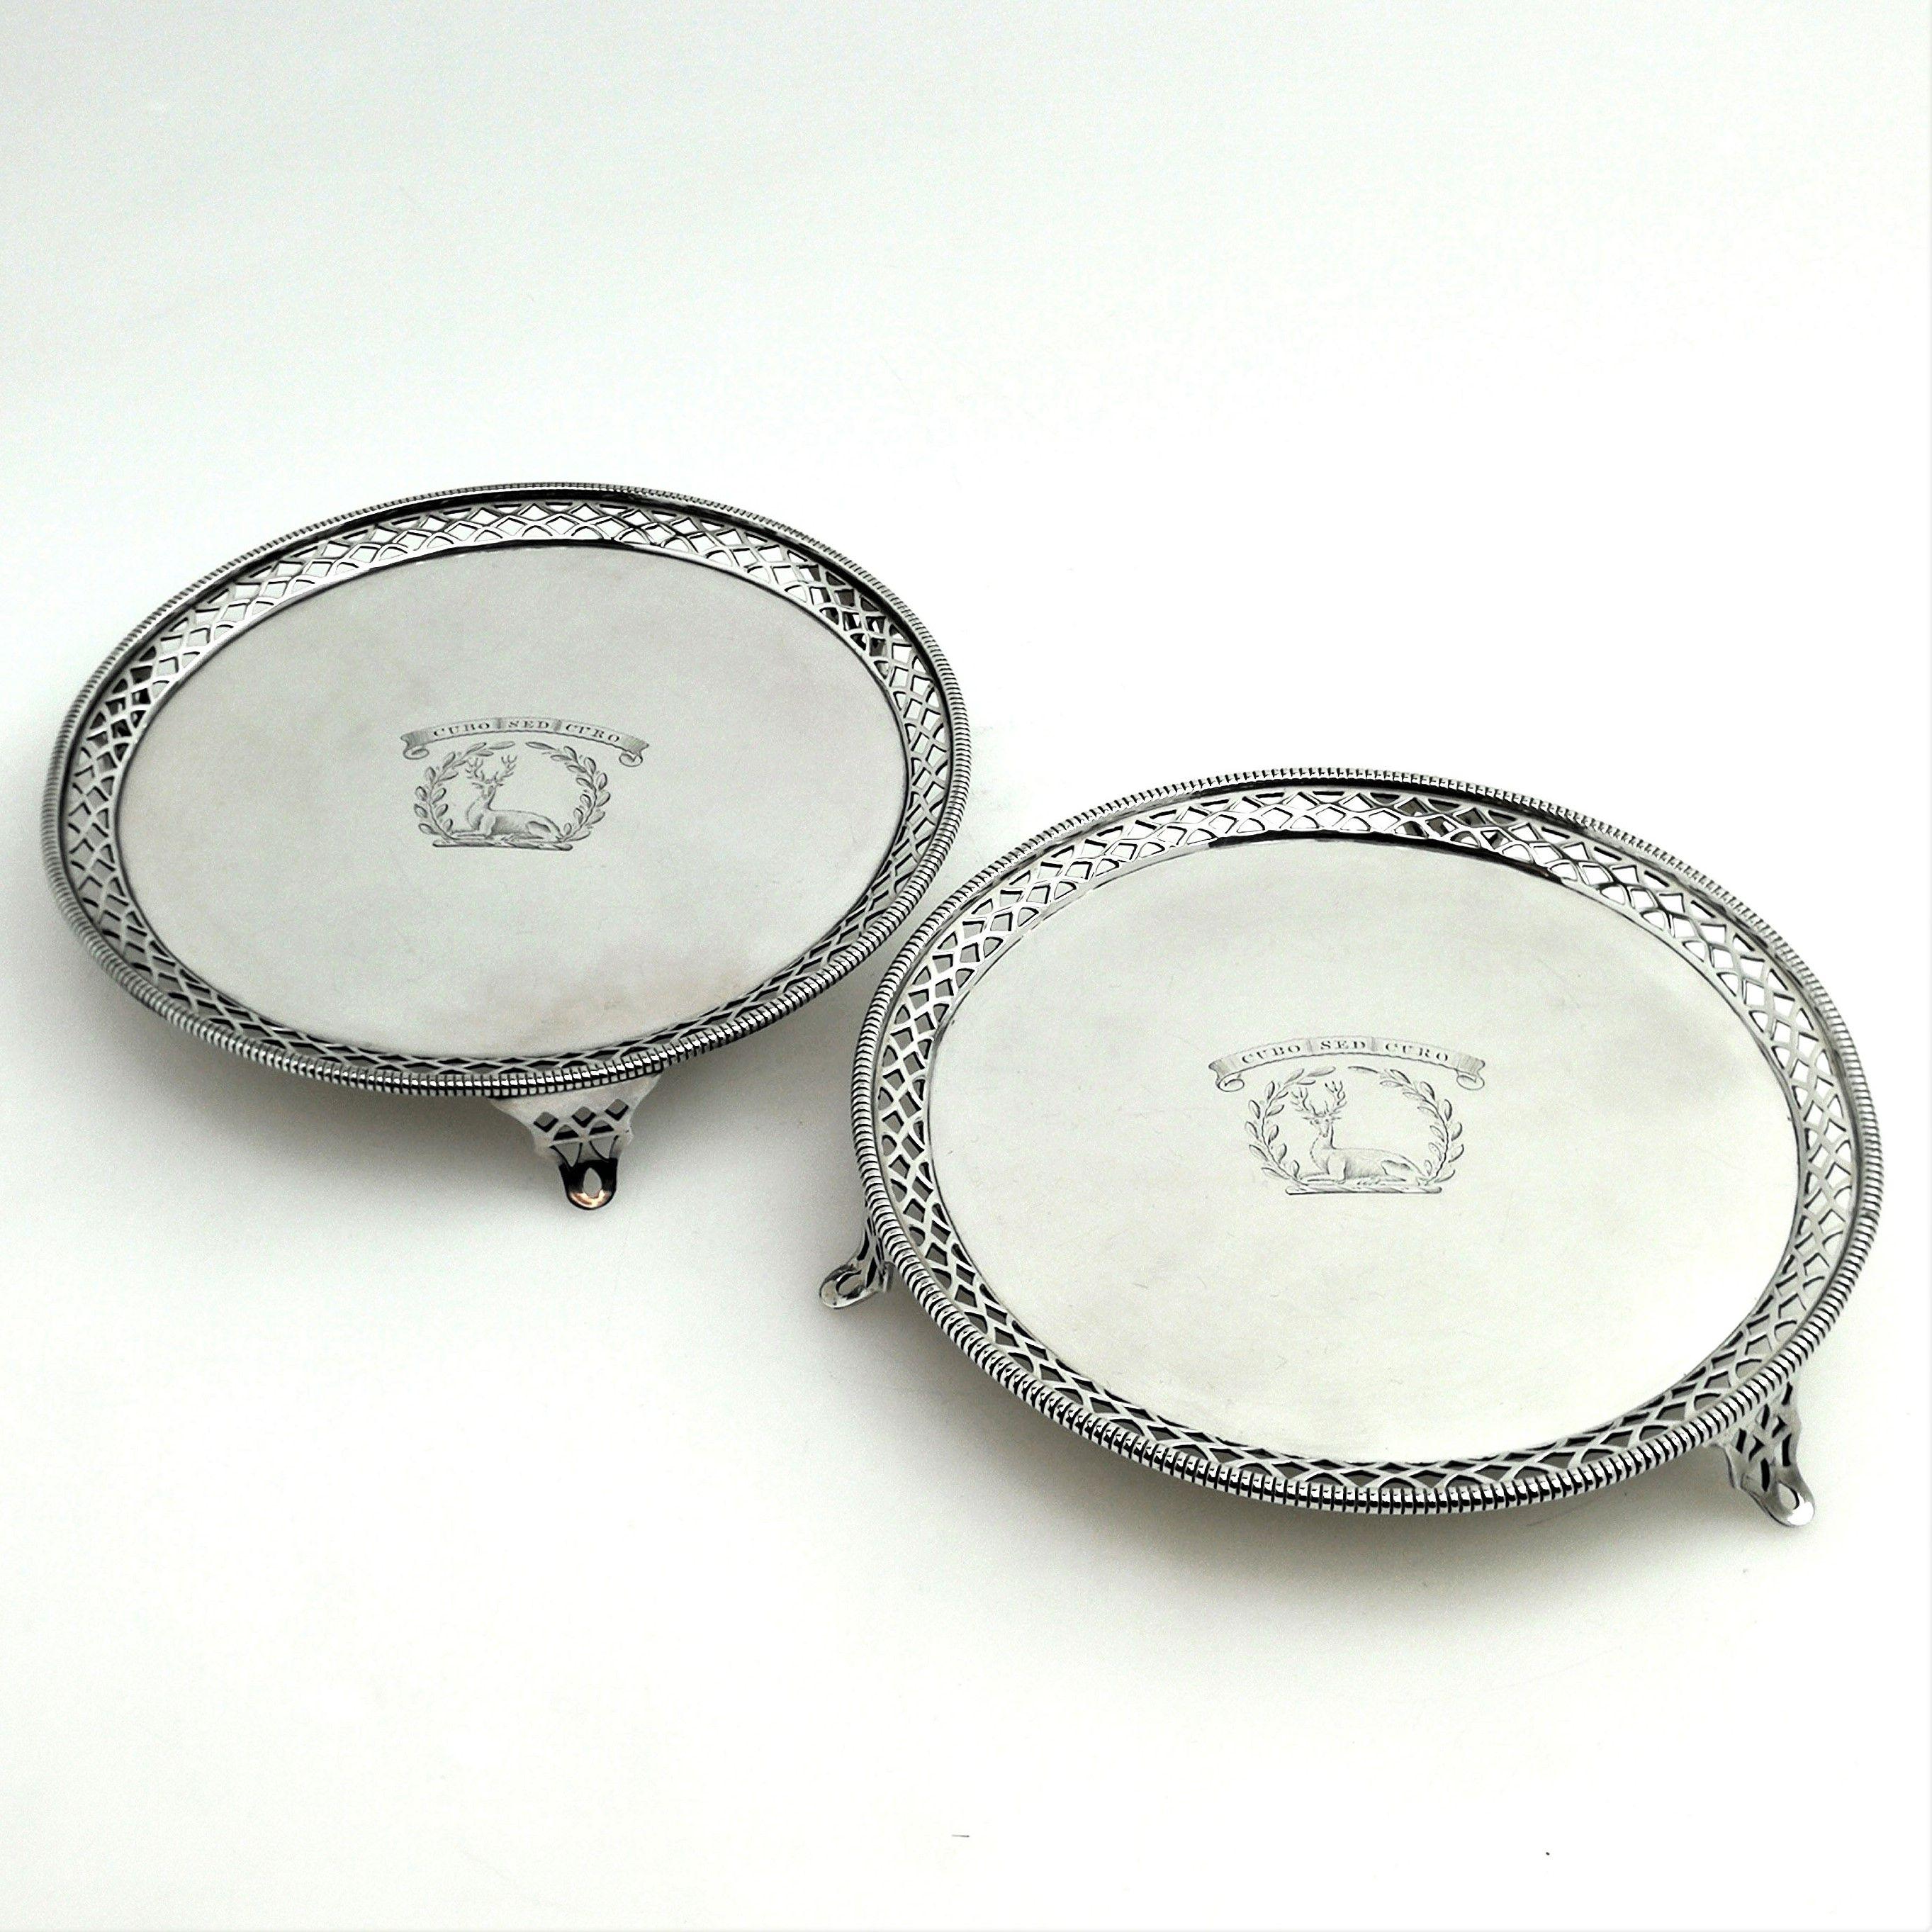 A pair of elegant George III Antique sterling Silver Salvers featuring a pierced border with a gadroon pattern rim. Each Tray has a crest engraved in the centre and each stands on 3 pierced feet.
 
 Made in London in 1768 by John Carter II.
 
